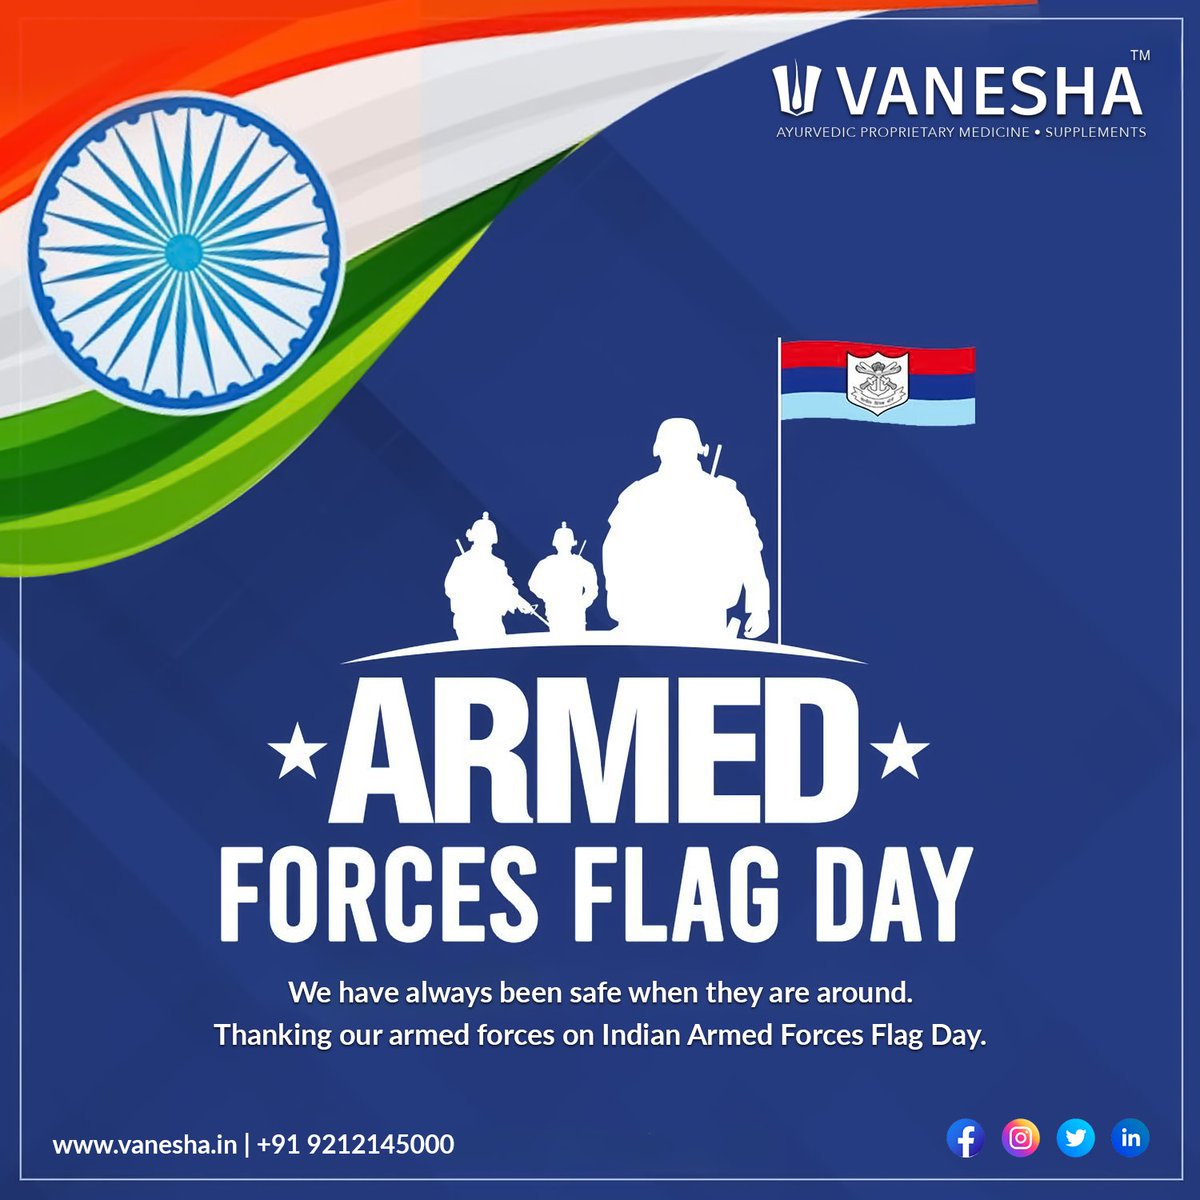 On this special day, let's stand united in honoring the men and women in uniform who protect our freedom with unwavering courage. 🇮🇳❤ 

#Sandtankfoundation #ArmedForcesFlagDay #SaluteOurHeroes #FlagDaySupport #ArmedForcesAppreciation #FlagDay2023 #MilitaryPride